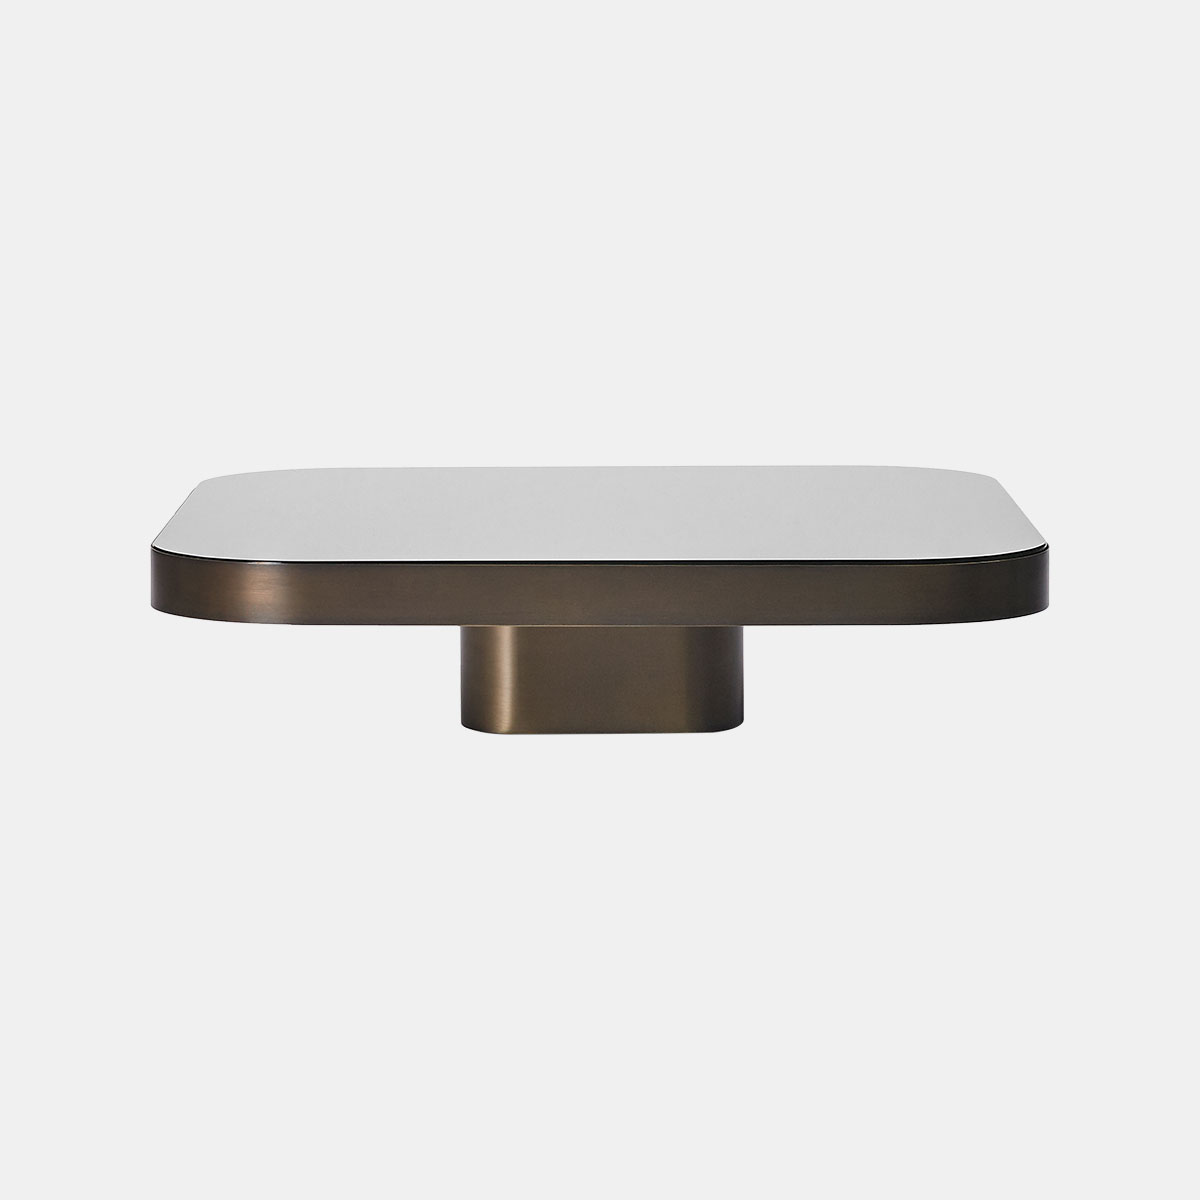 classicon-guilherme-torres-bow-coffee-table-1-messing-verbronsd-001shop